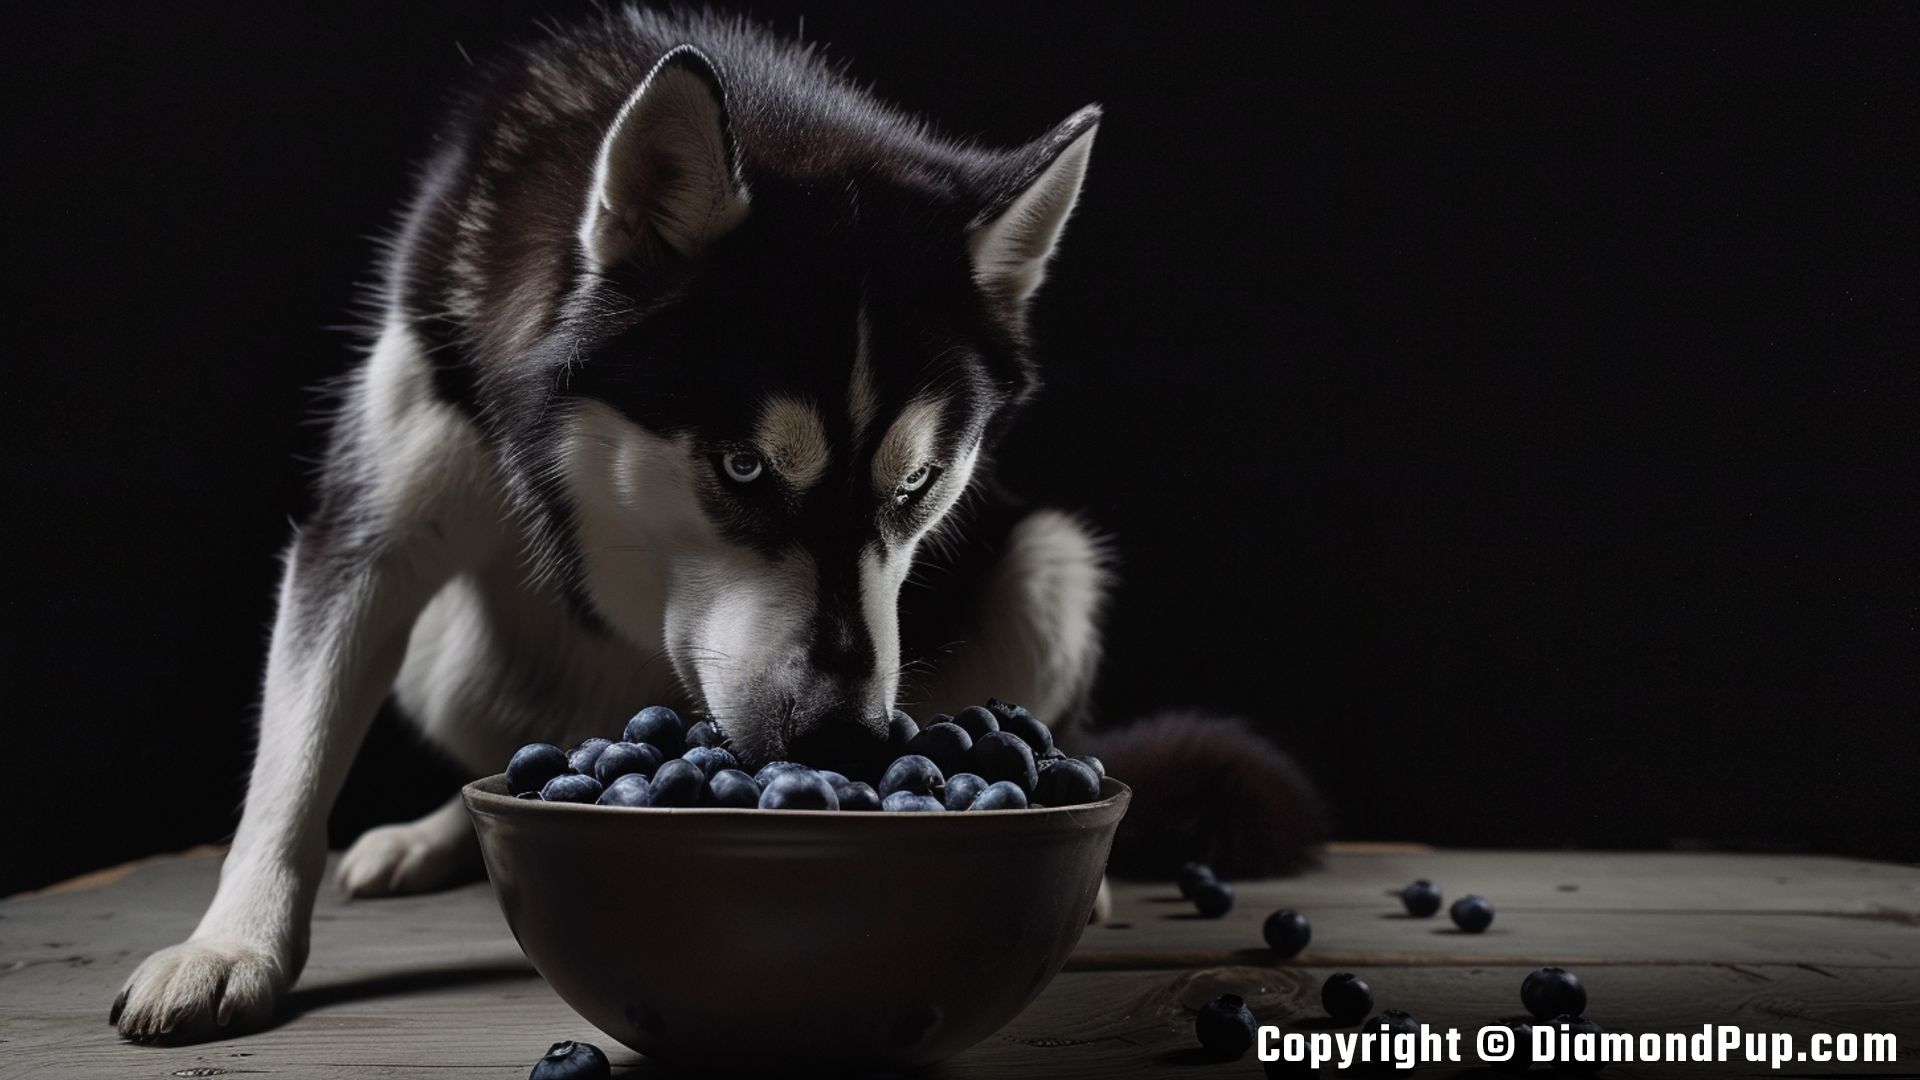 Photograph of Husky Eating Blueberries